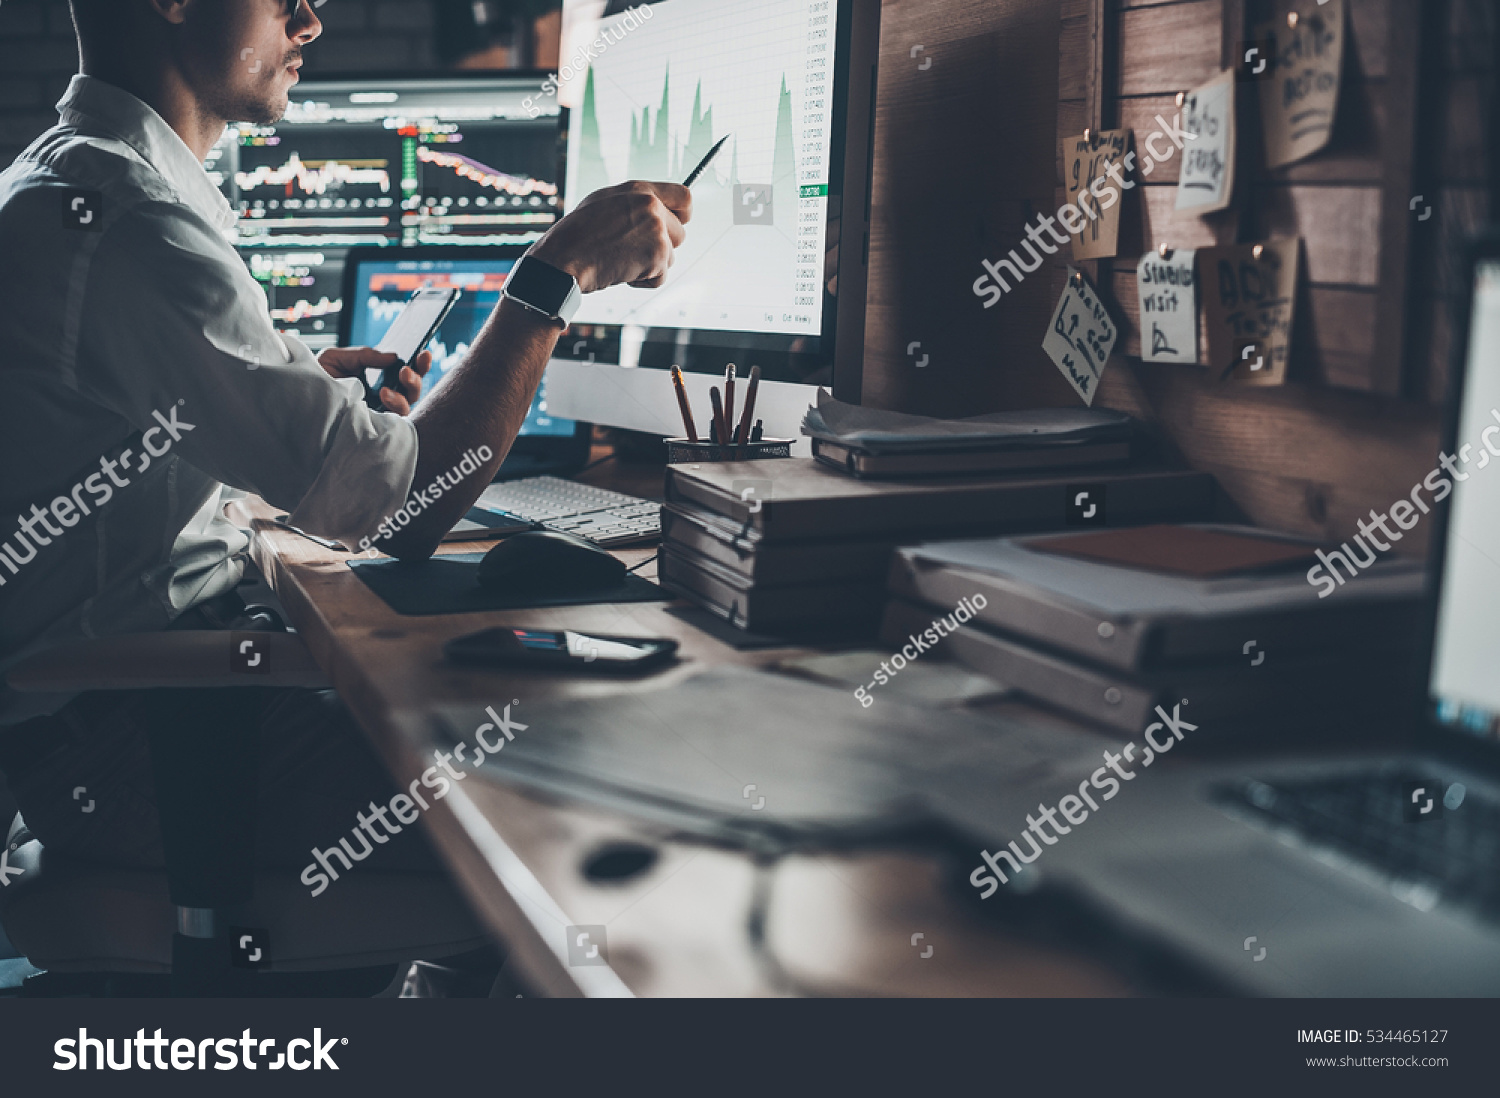 Analyzing data. Close-up of young businessman looking at monitor while sitting at the desk in creative office  #534465127